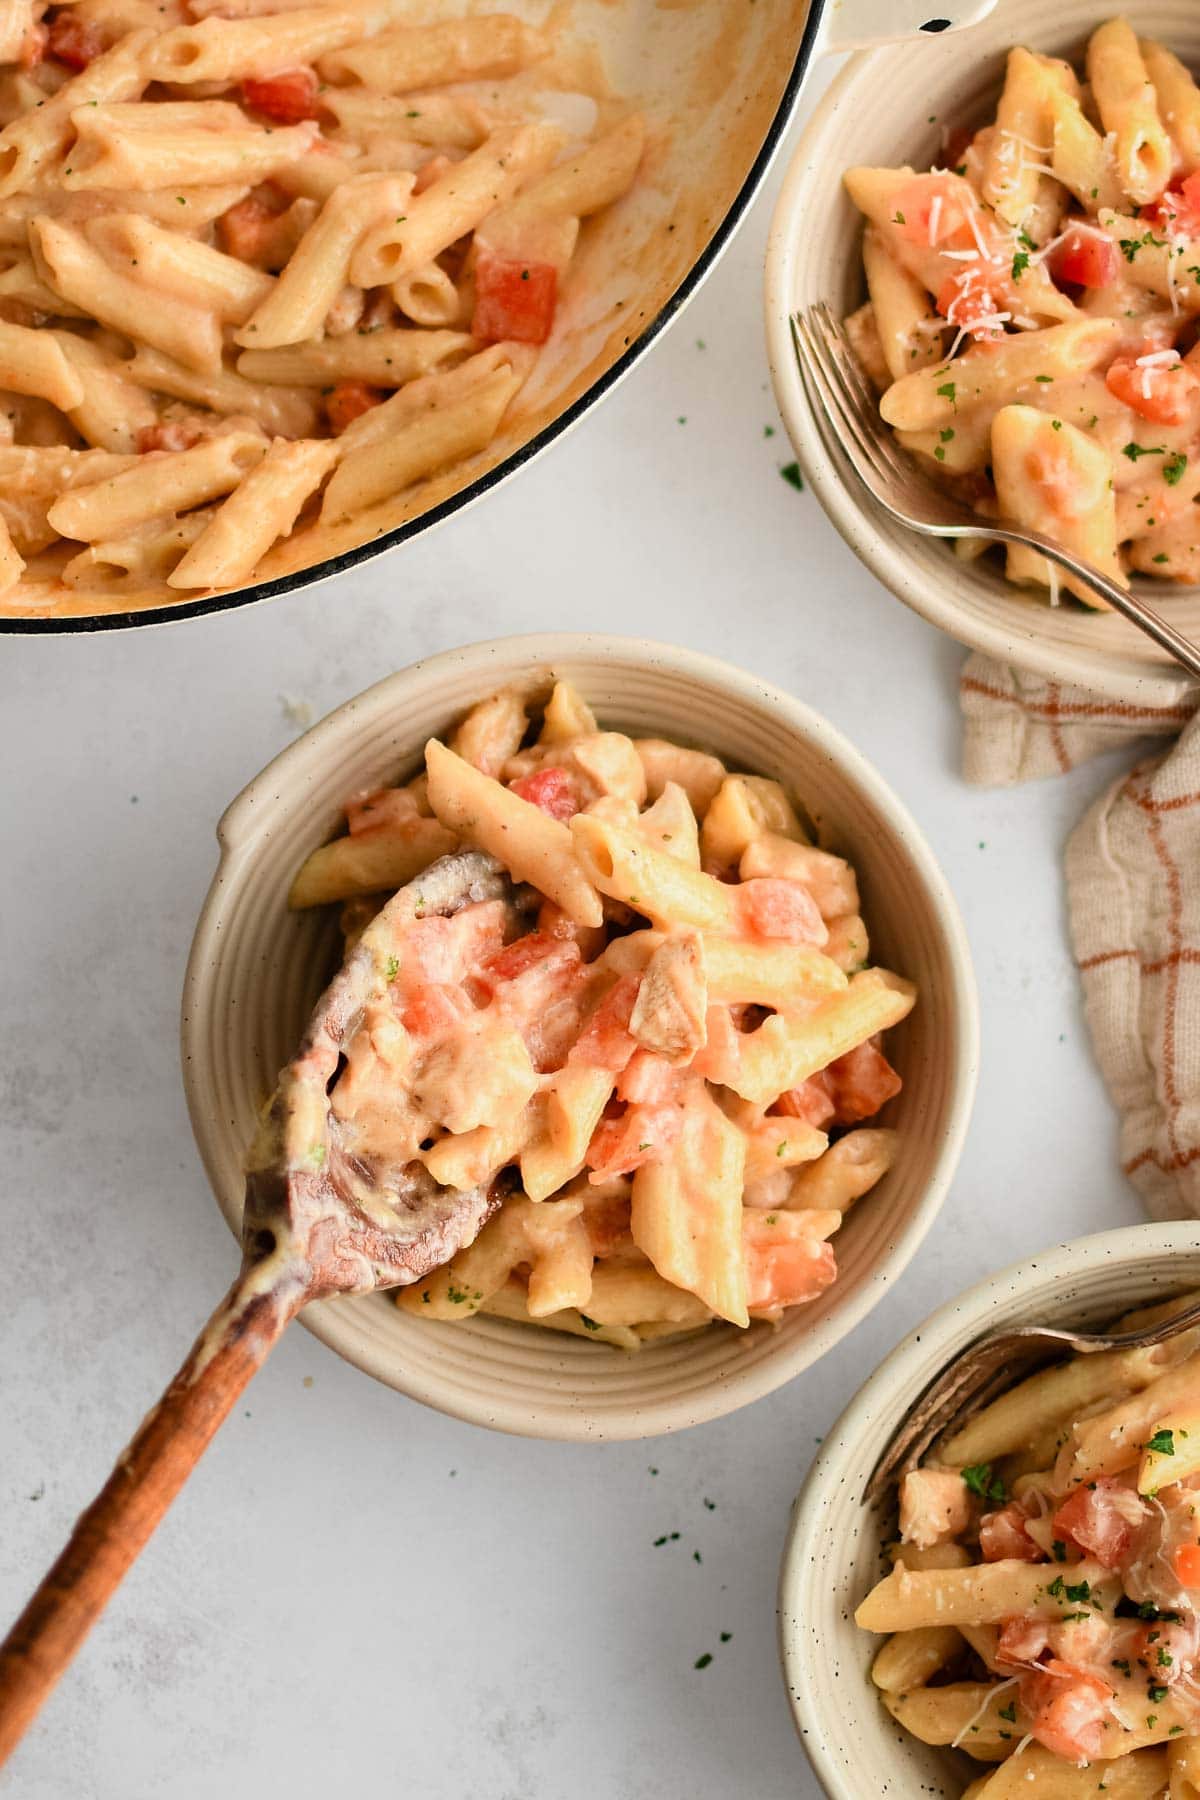 Cajun chicken pasta in bowls and with a wooden spoon.